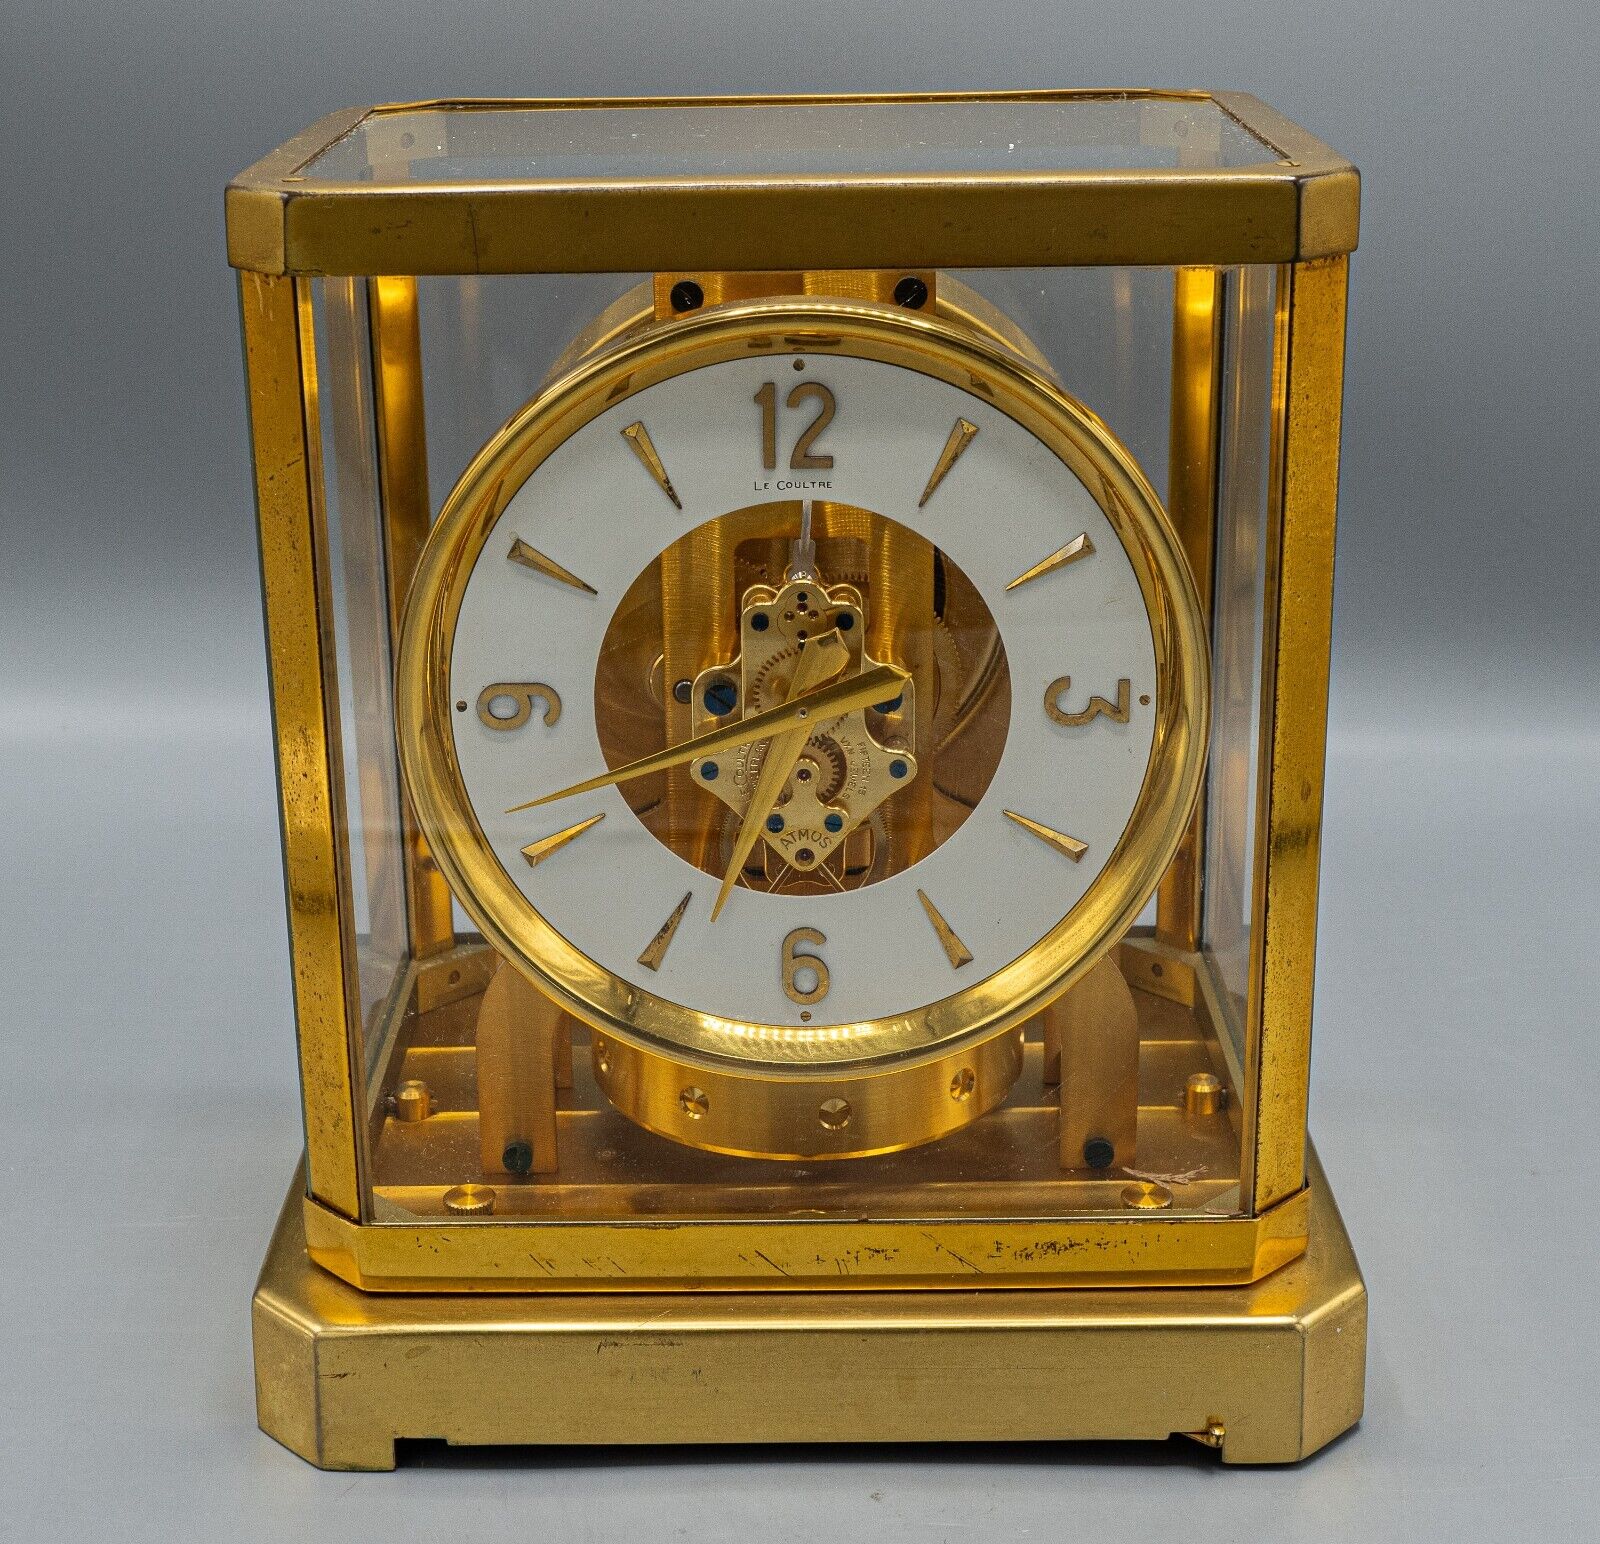 READ Jaeger LeCoultre Atmos Clock 519 Working 1950s - FREE USA SHIPPING